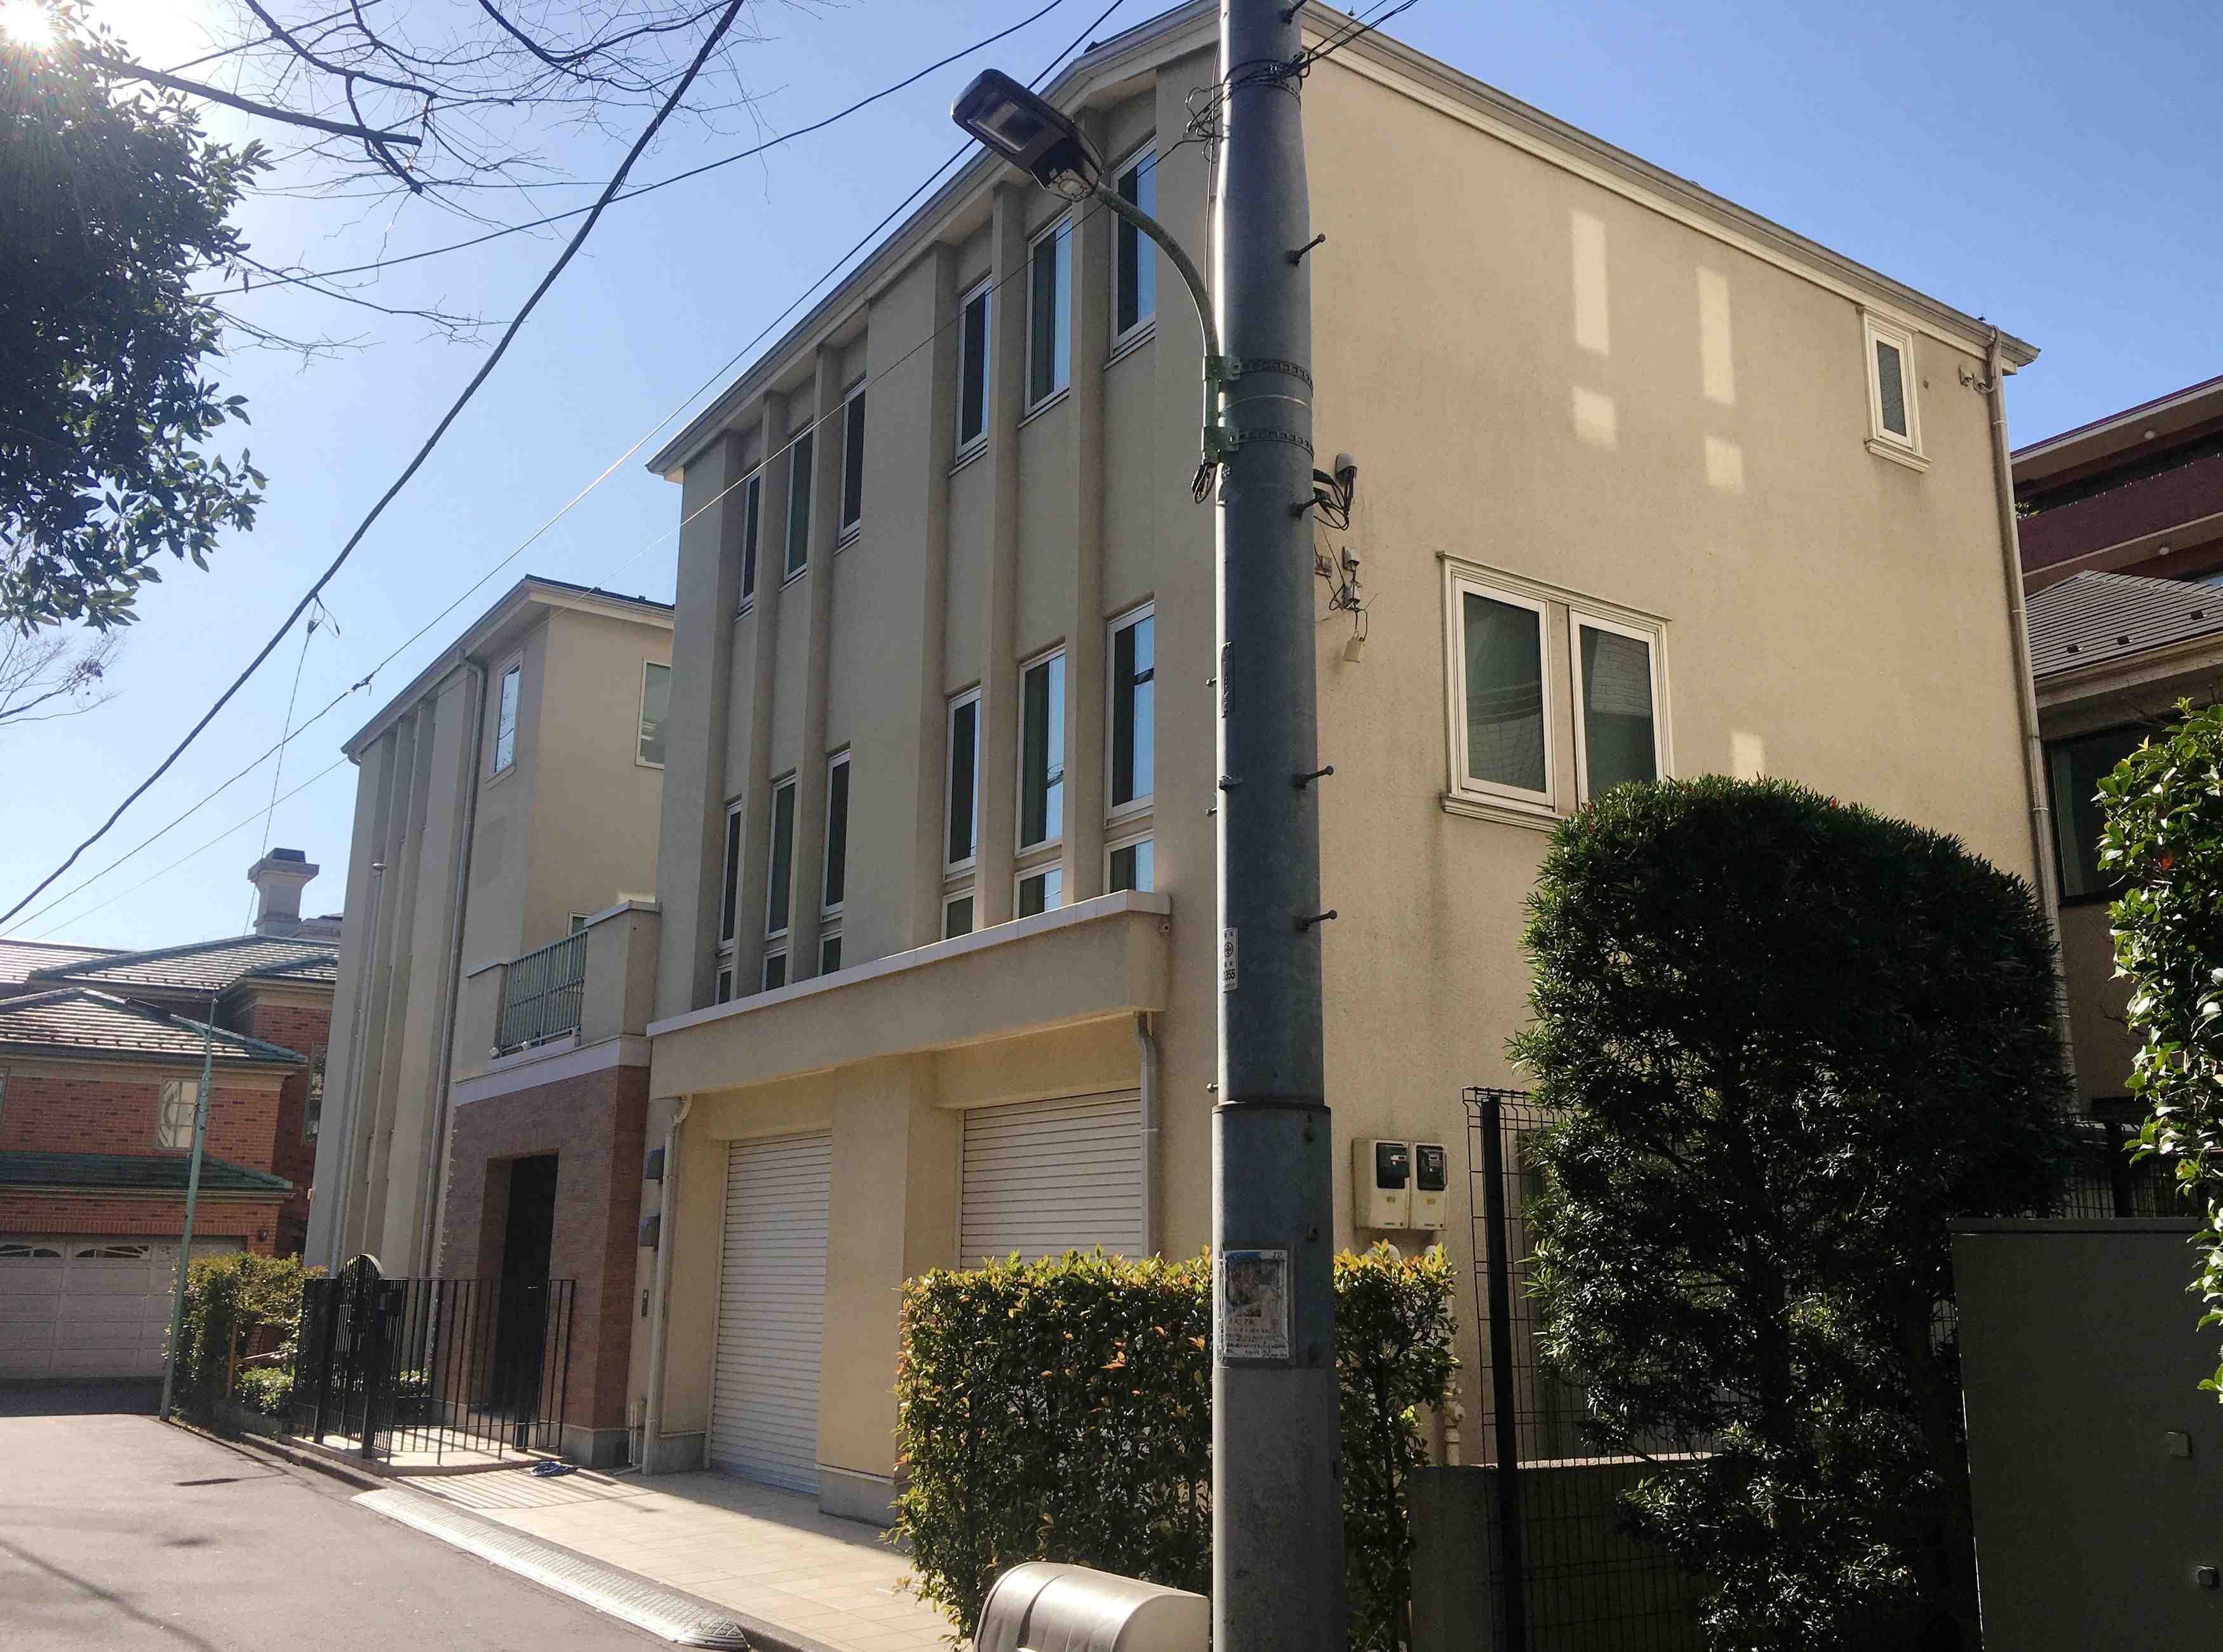 A view of a house where is believed that former Nissan chairman Carlos Ghosn lived before he fled to Lebanon, in Tokyo